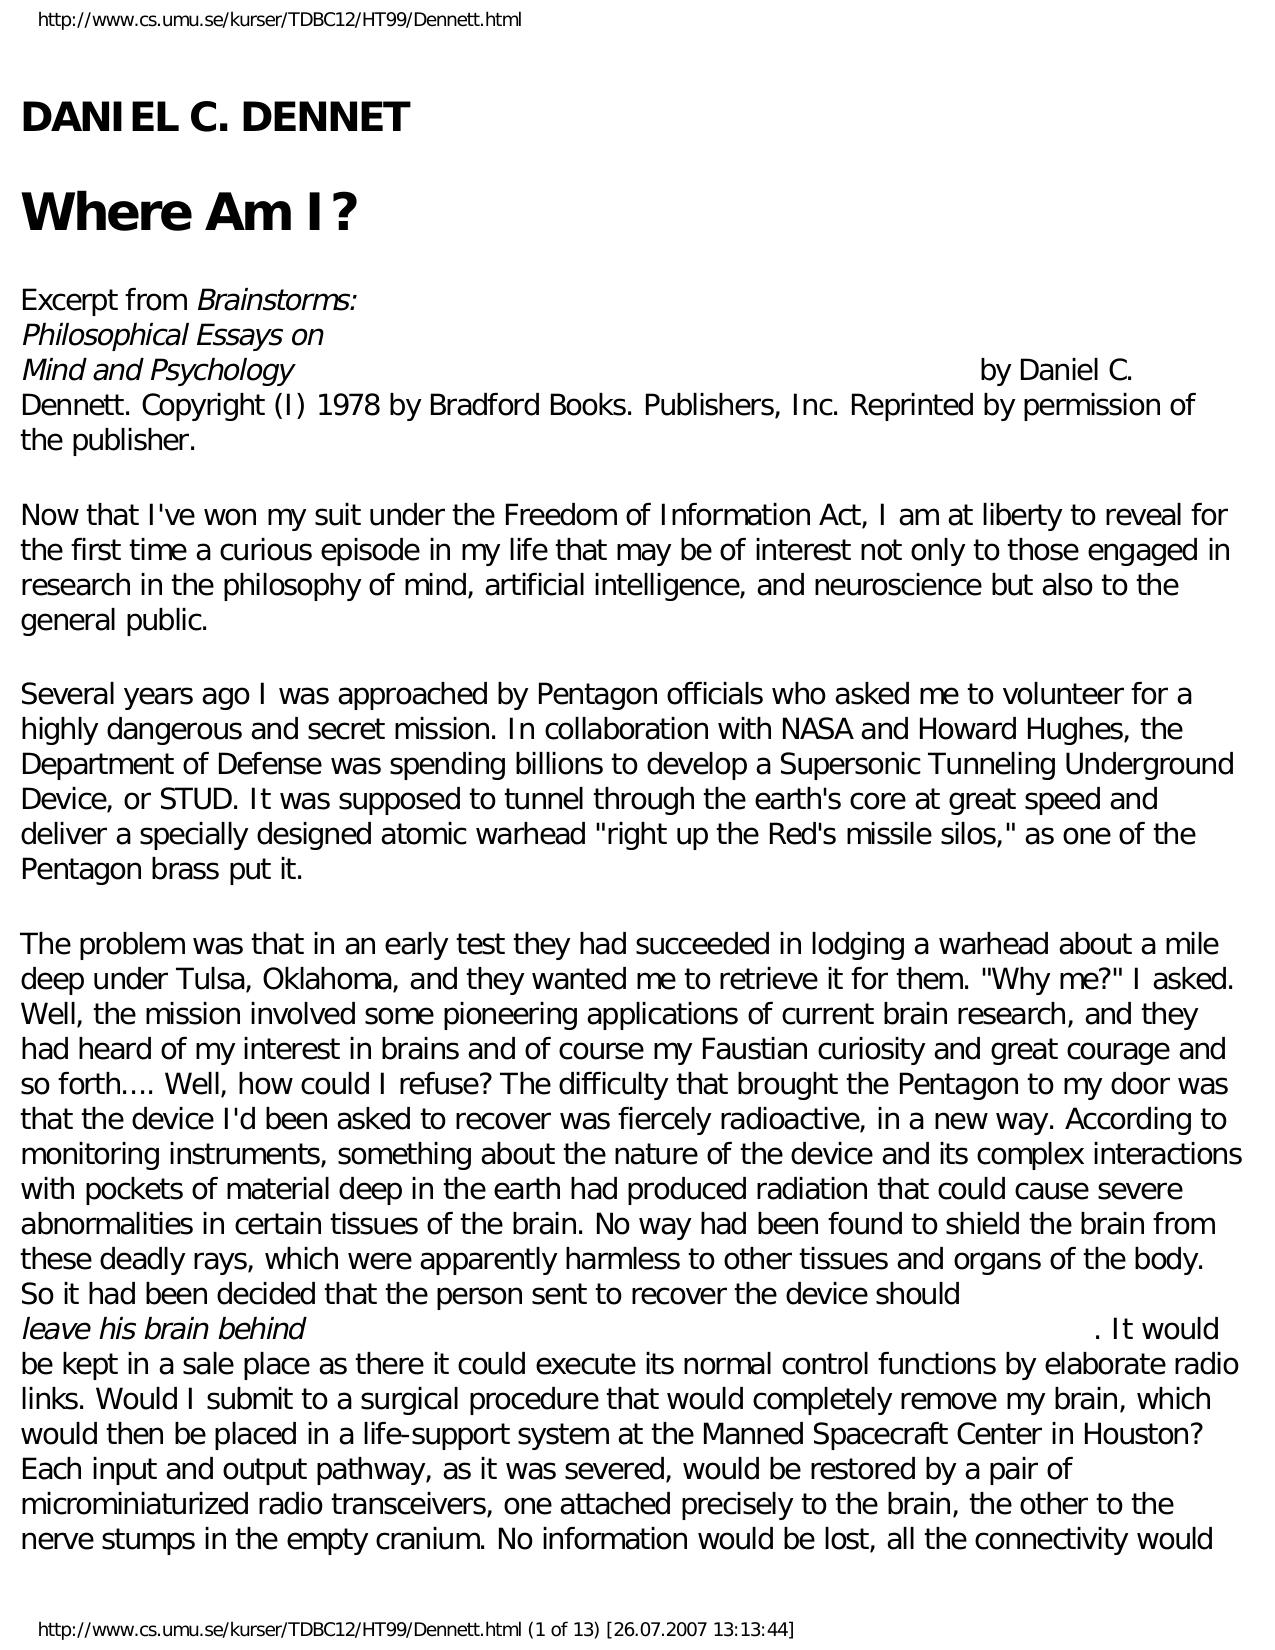 Where Am I? - Excerpt from Brainstorms: Philosophical Essays on Mind and Psychology